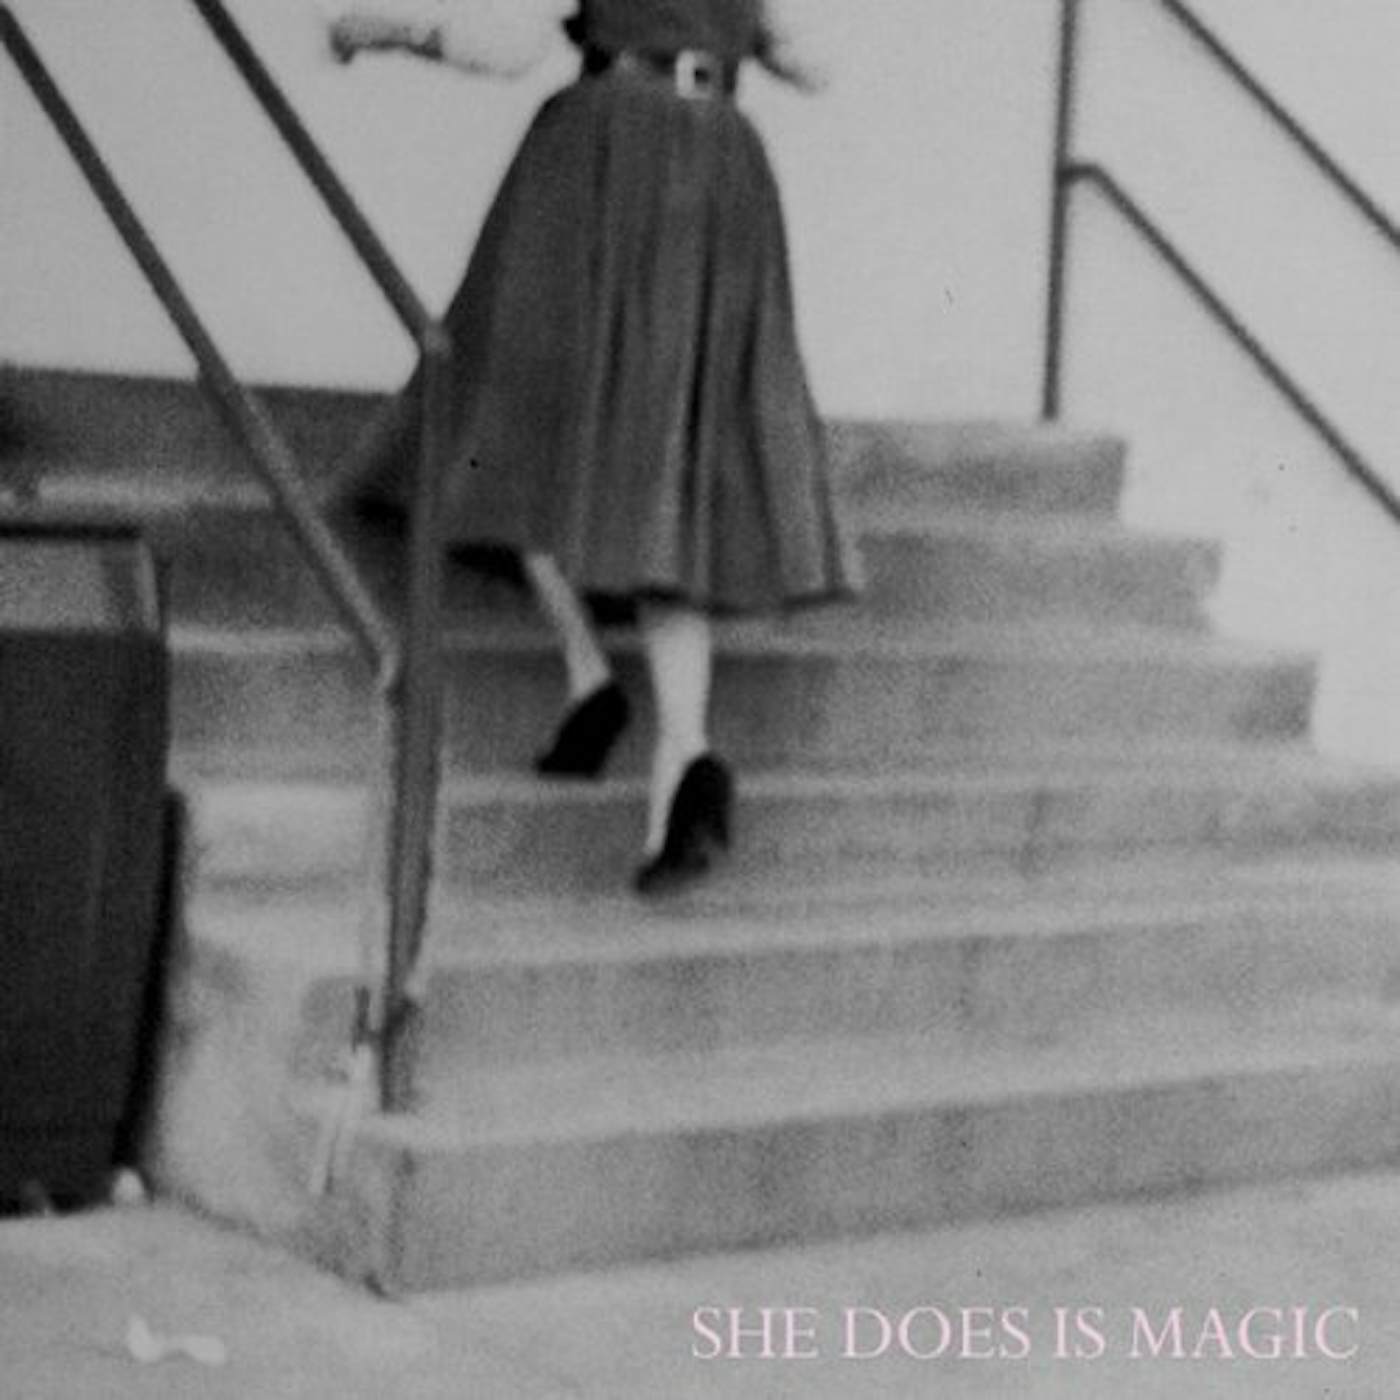 She Does Is Magic My Height In Heels Vinyl Record